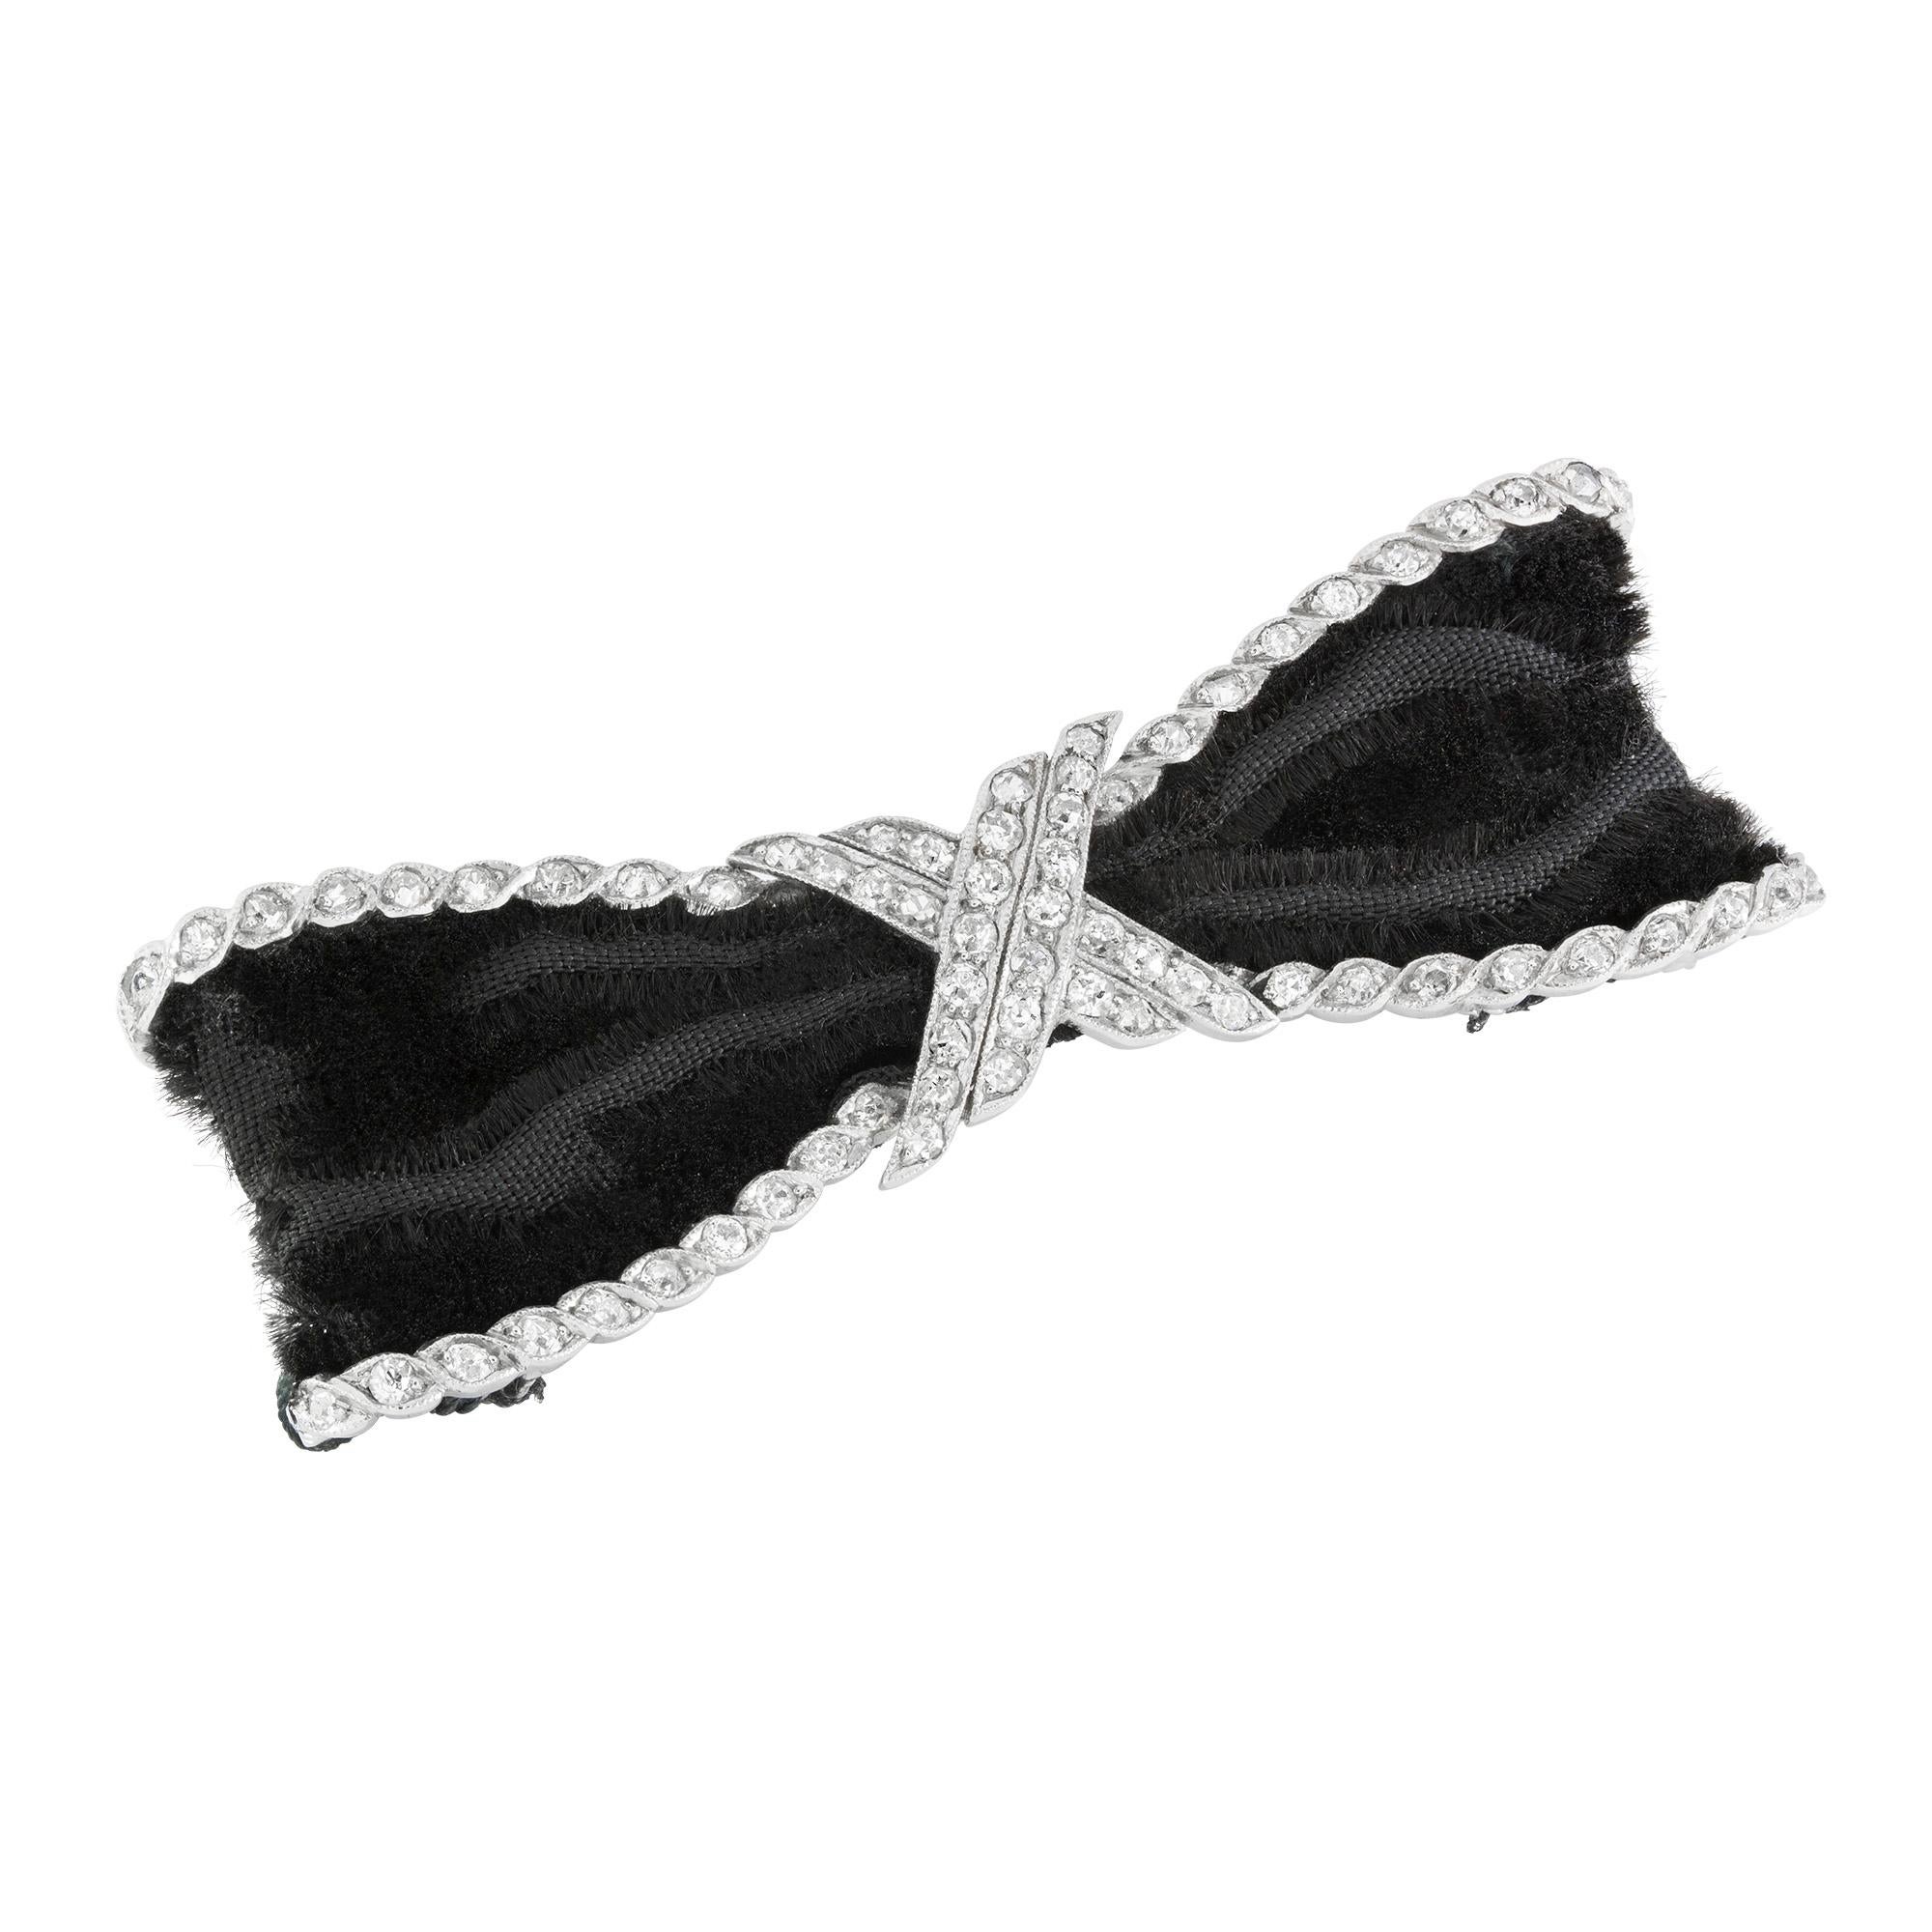 An Edwardian diamond bow brooch, the open ribbon tied bow with old-cut diamond set cross-over centre and diamond set barley twist border with black velvet ribbon to each loop, measuring approximately 5.3cm, circa 1910, gross weight 9.2 grams.

This